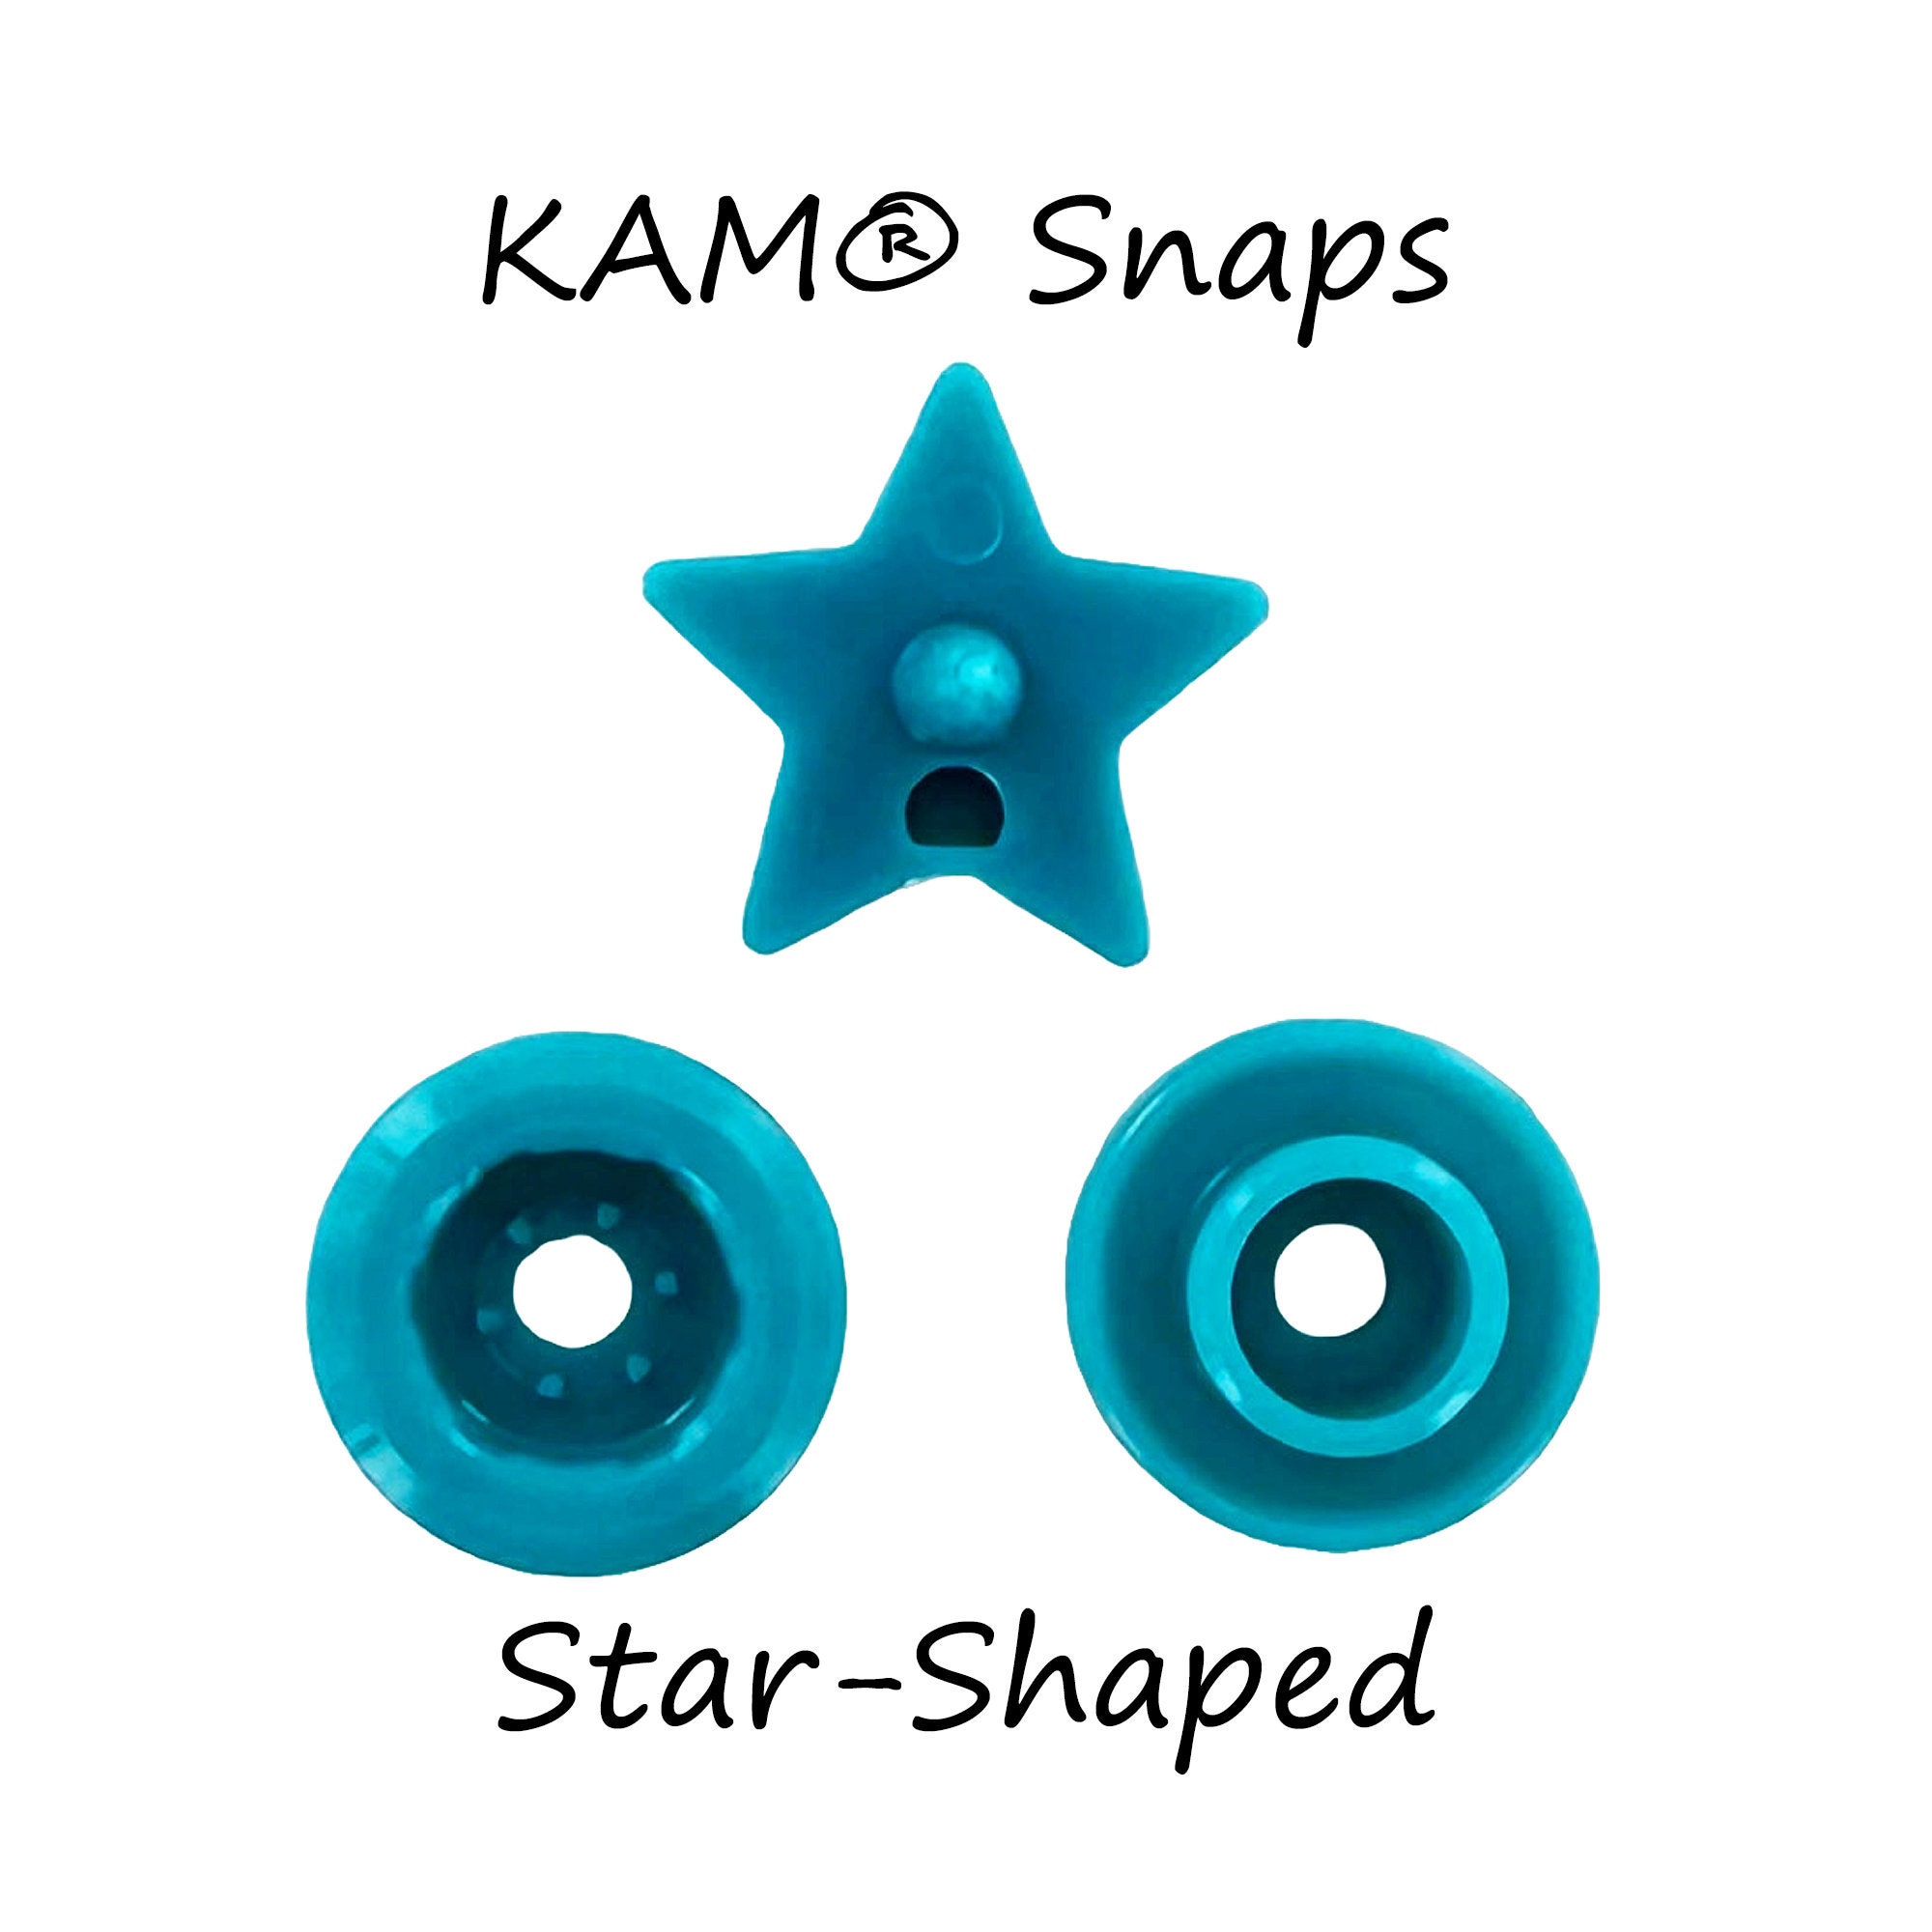 Poo Two-toned Engraved Gloss KAM Snaps Size 20 Poo Snap, Plastic